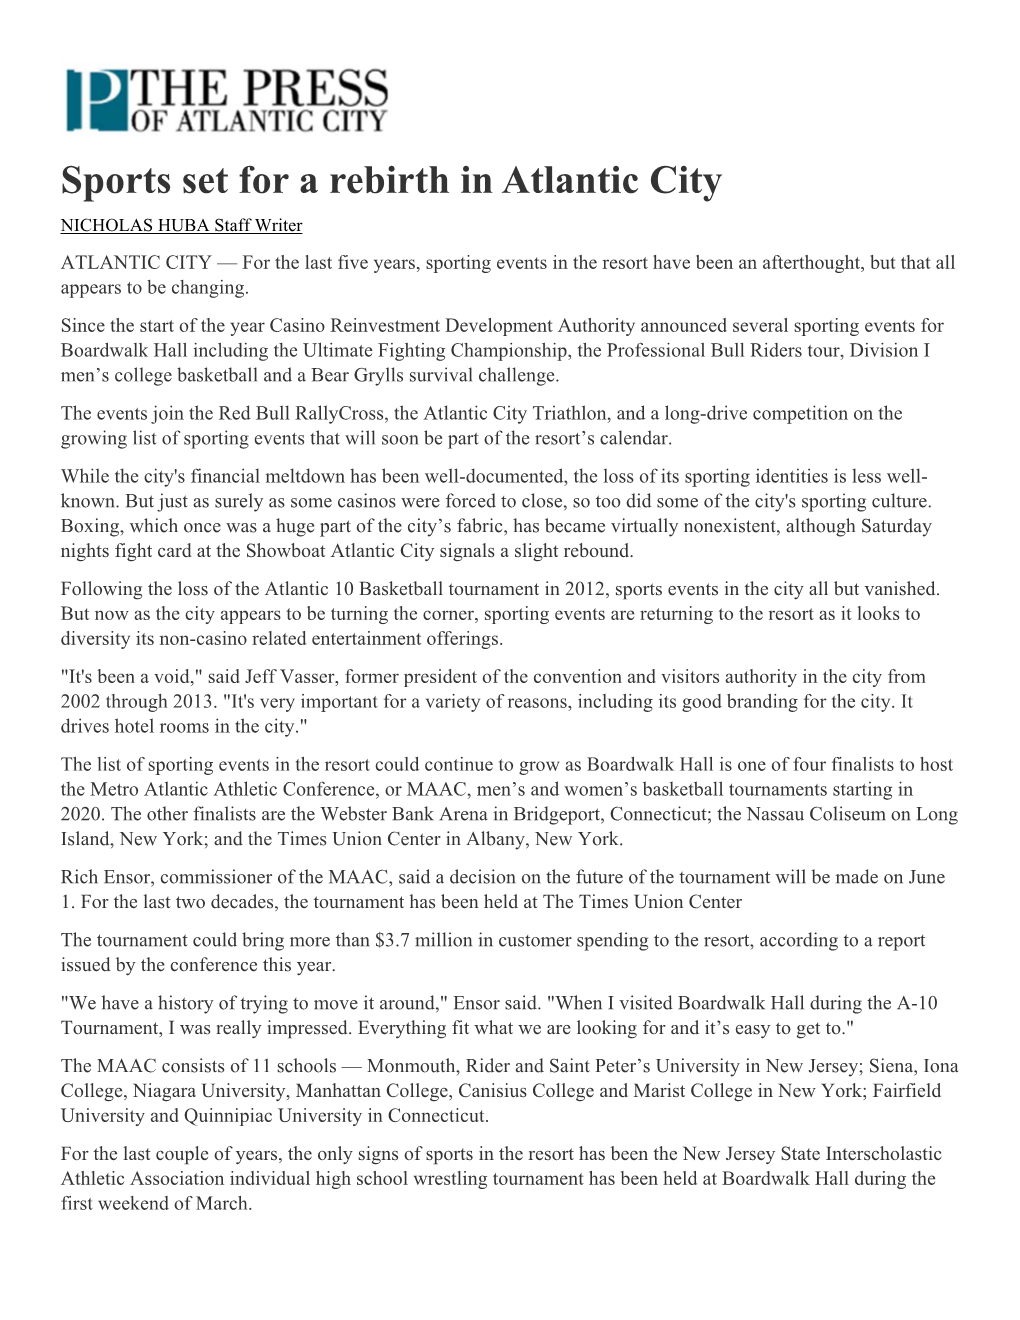 Sports Set for a Rebirth in Atlantic City